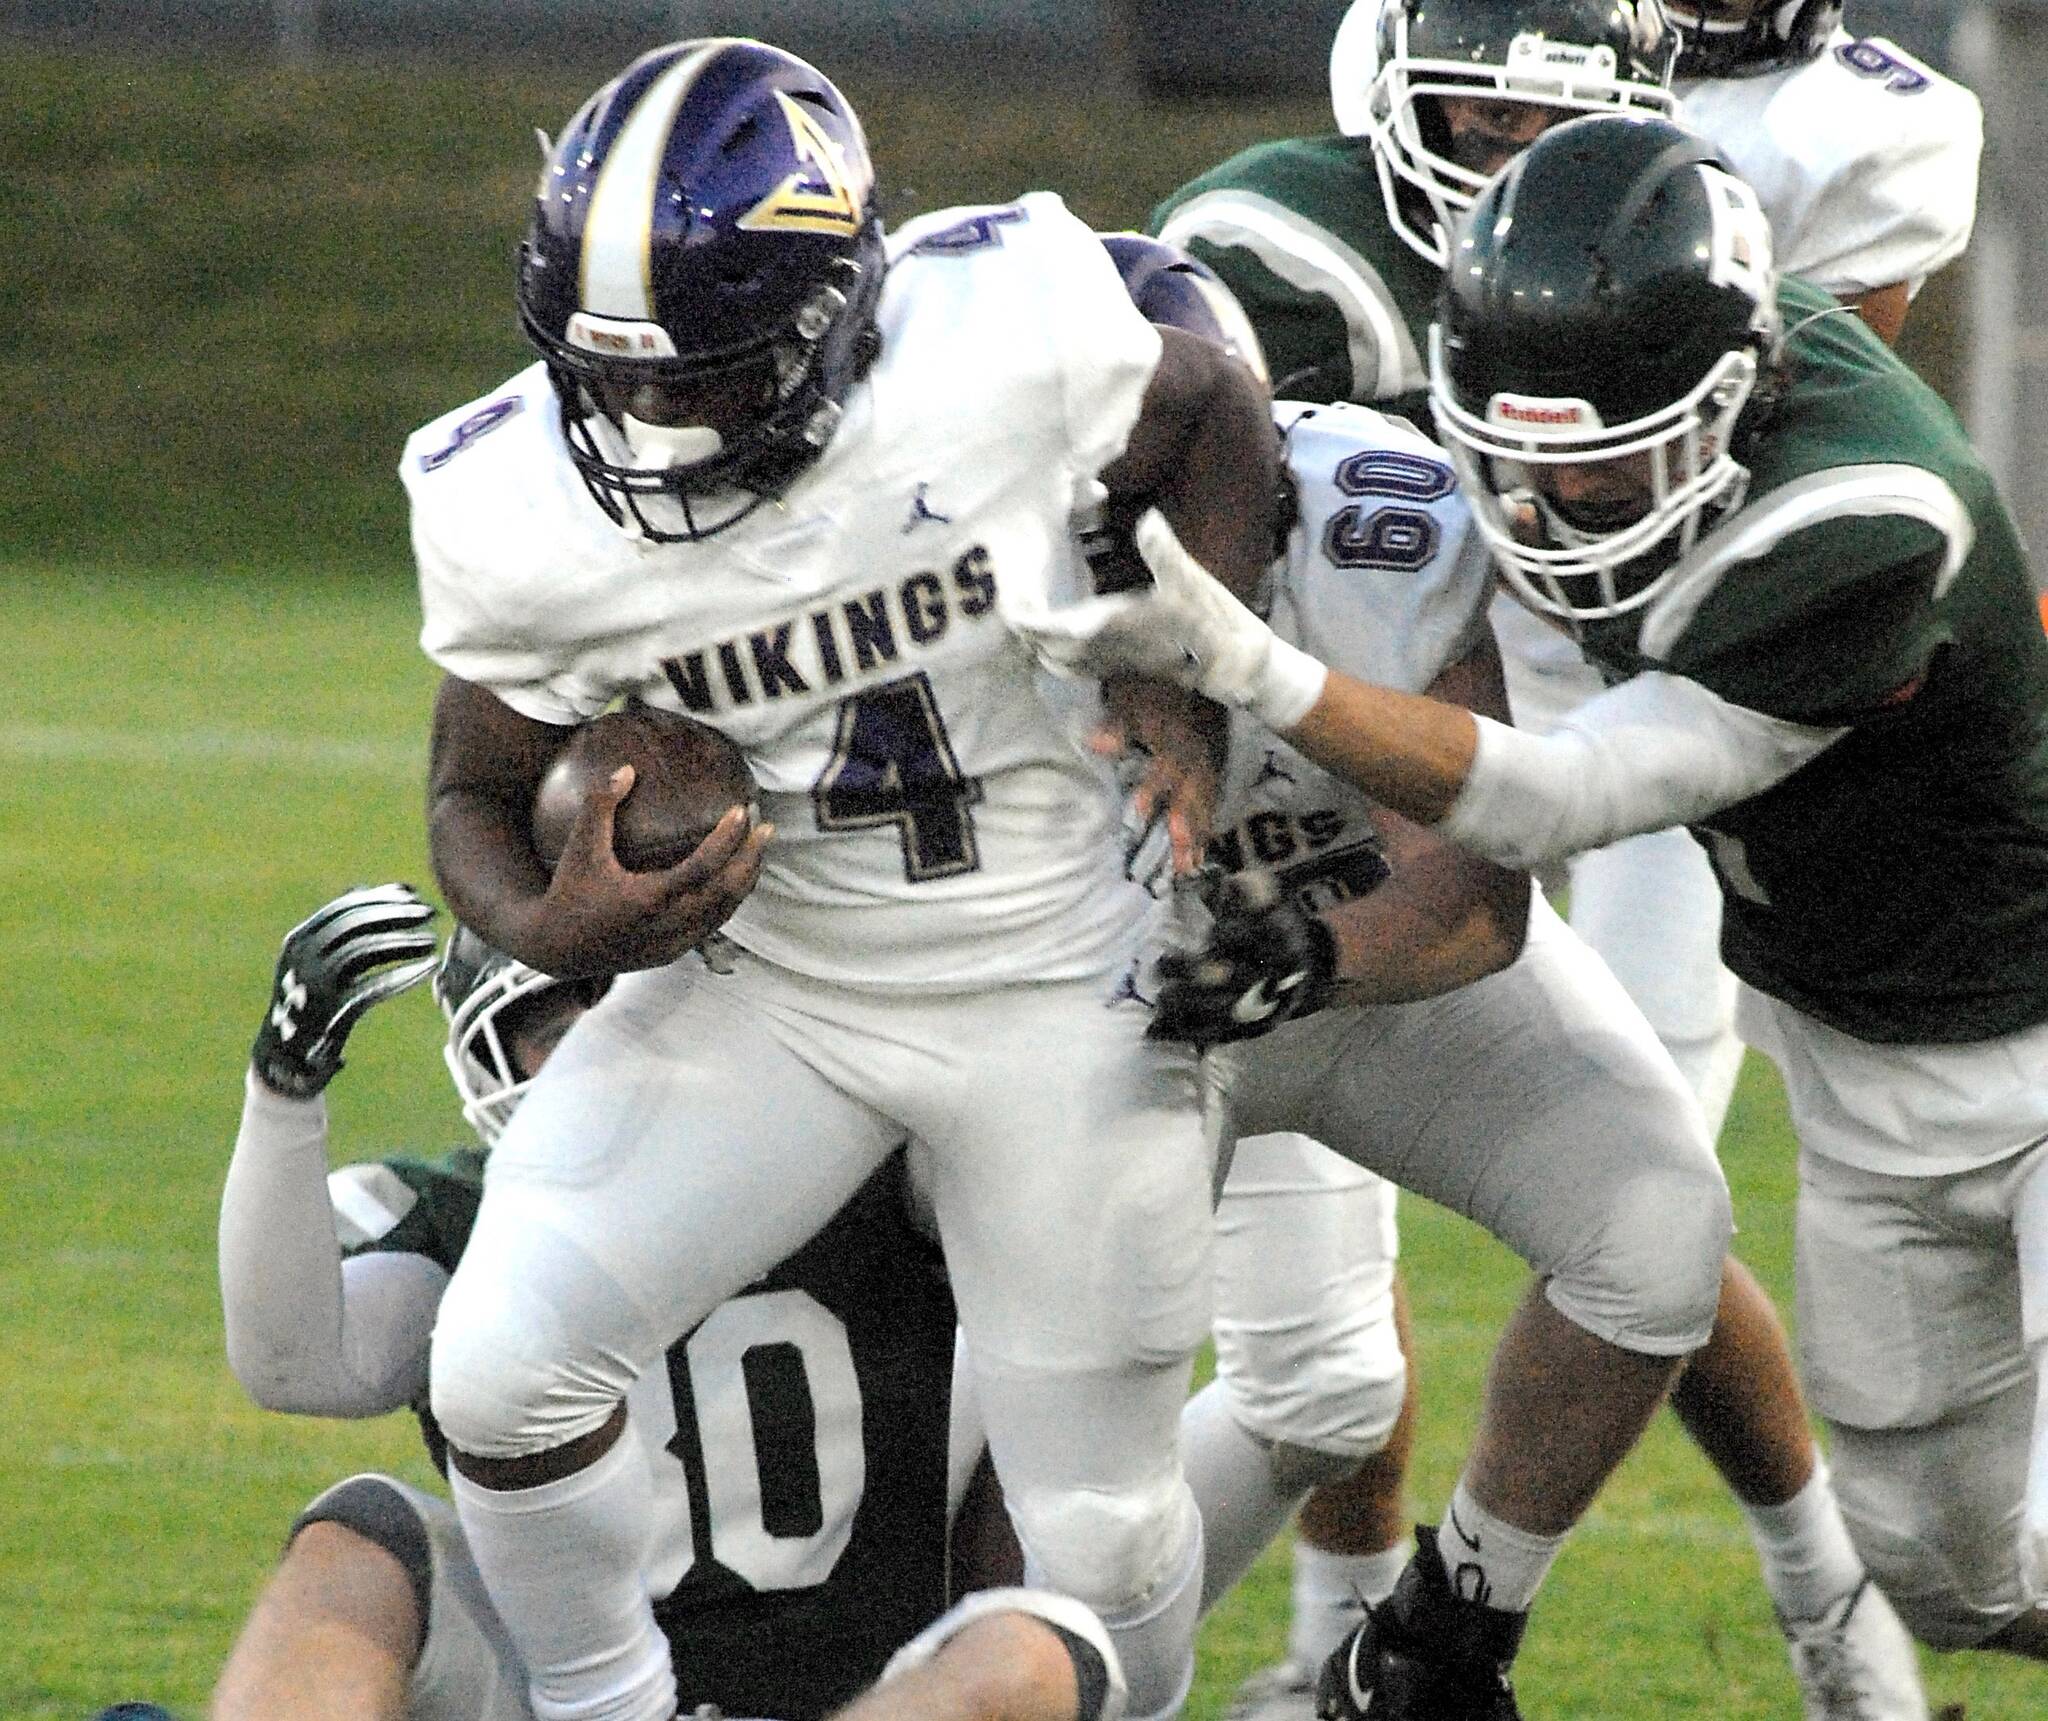 North Kitsap’s Zeke Harris, front, gets an assist from teammate Lincoln Hawkins before being wrapped up by the Port Angeles defense on Friday night at Port Angeles Civic Field. (Keith Thorpe/Peninsula Daily News)